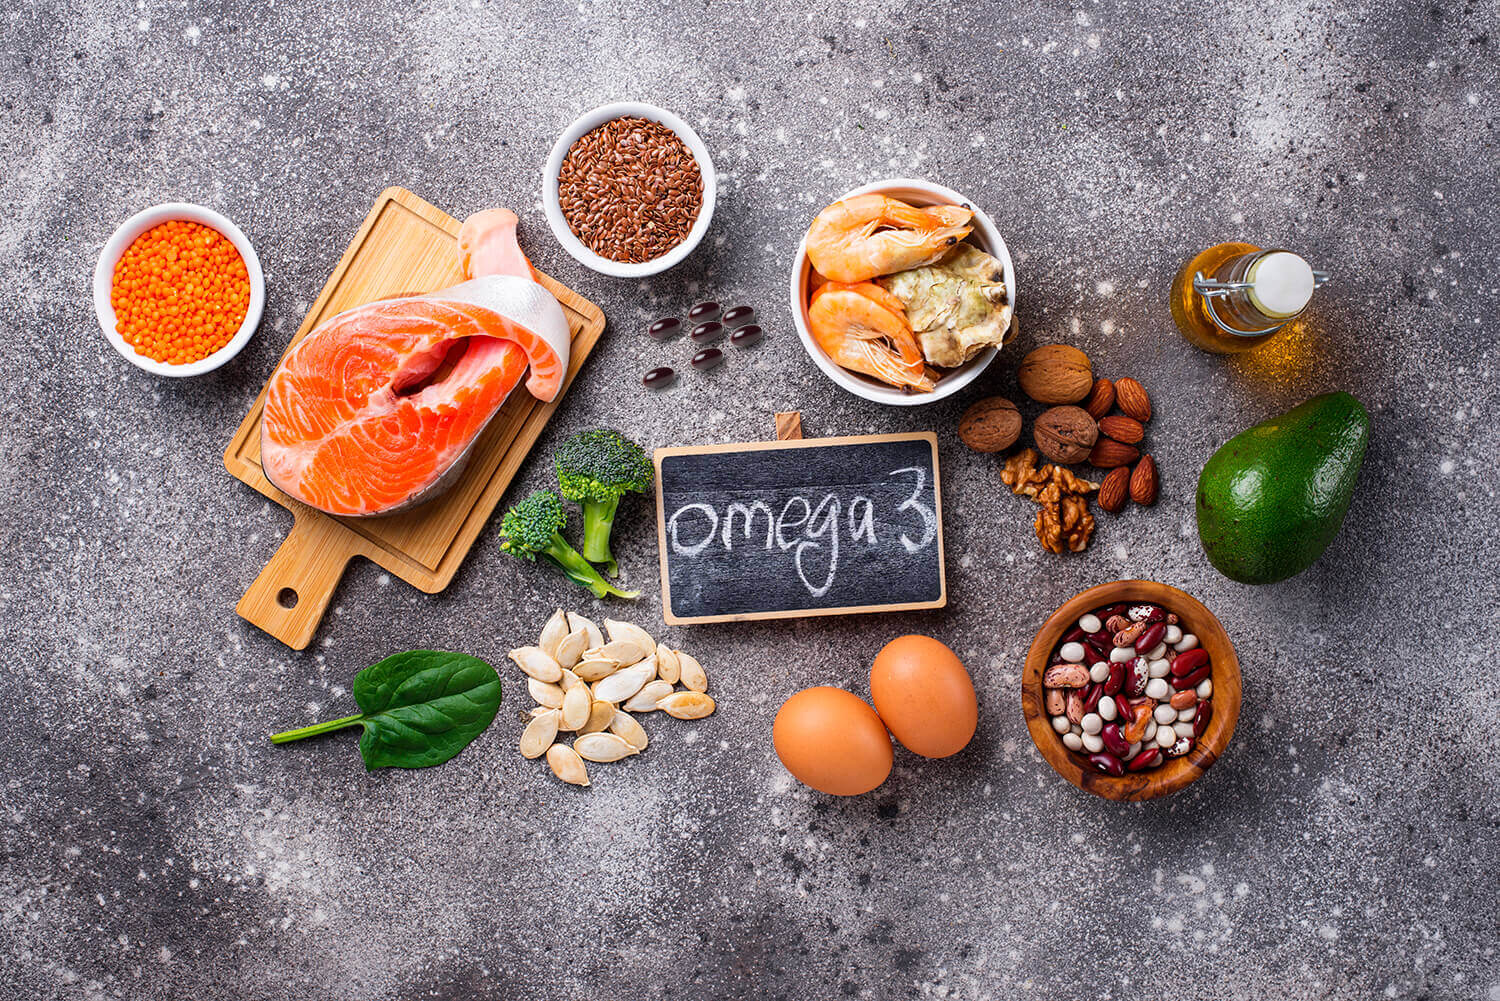 12 Must-Have Foods That Are Very High in Omega-3s